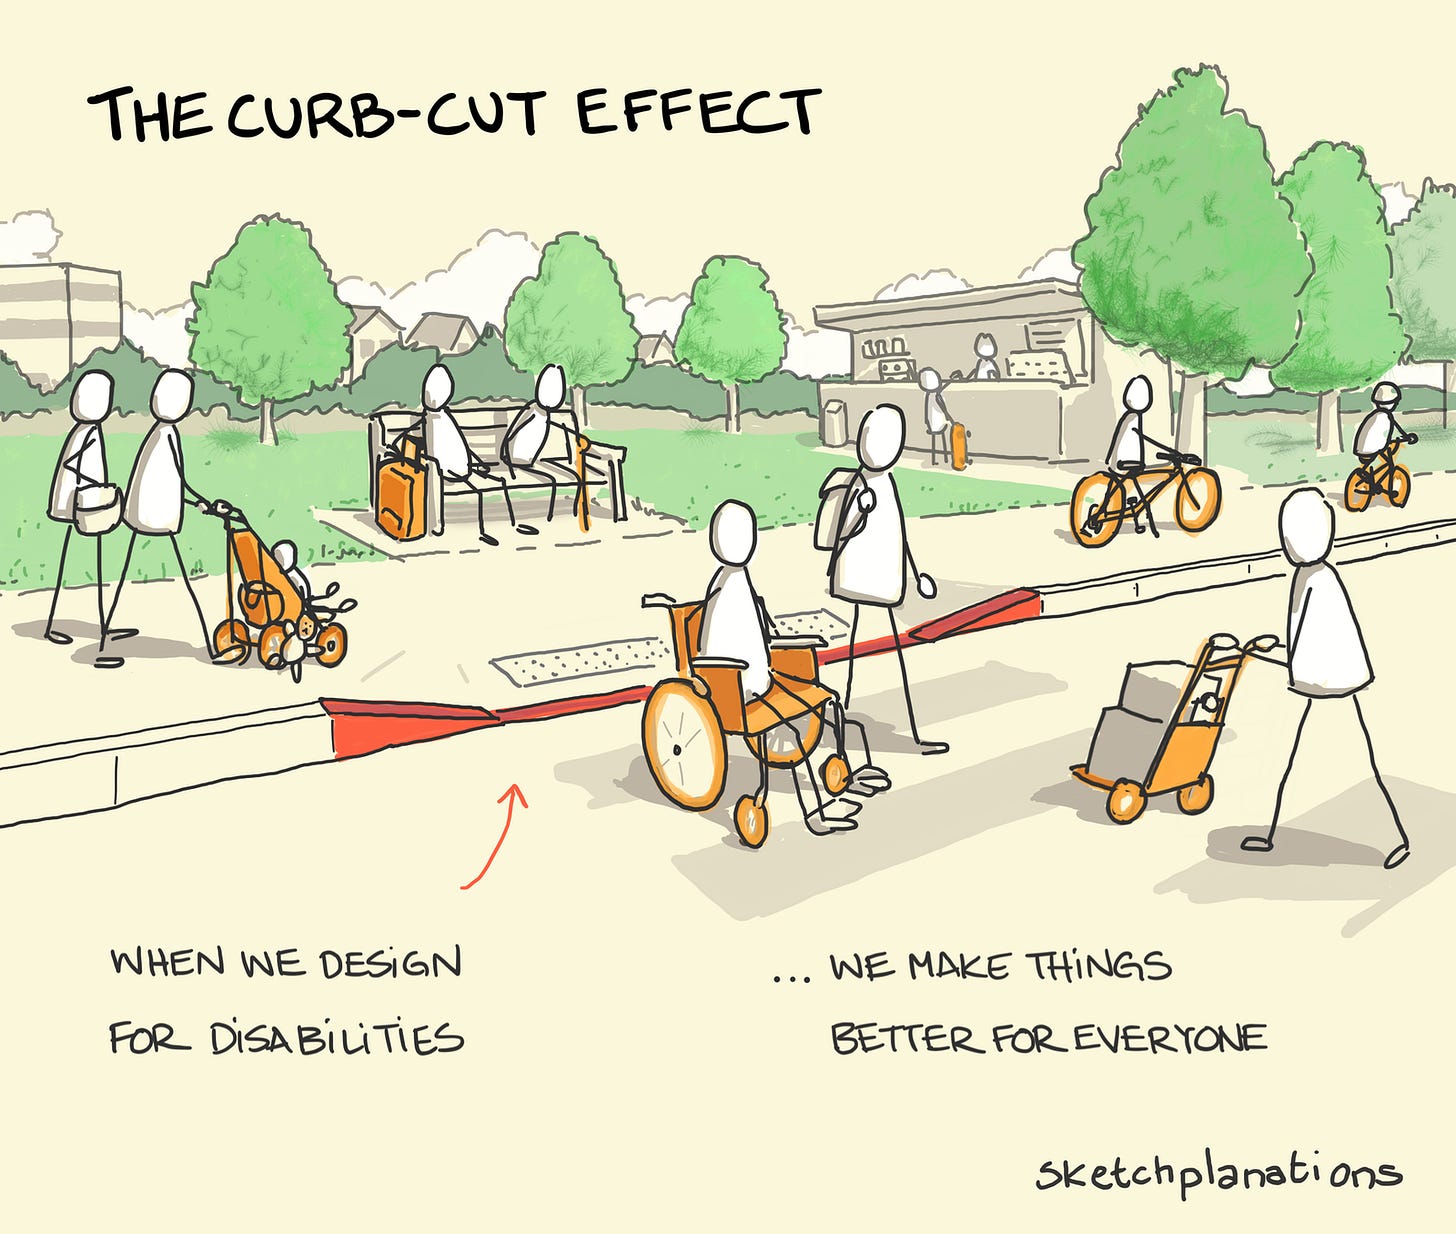 The curb-cut effect - Sketchplanations